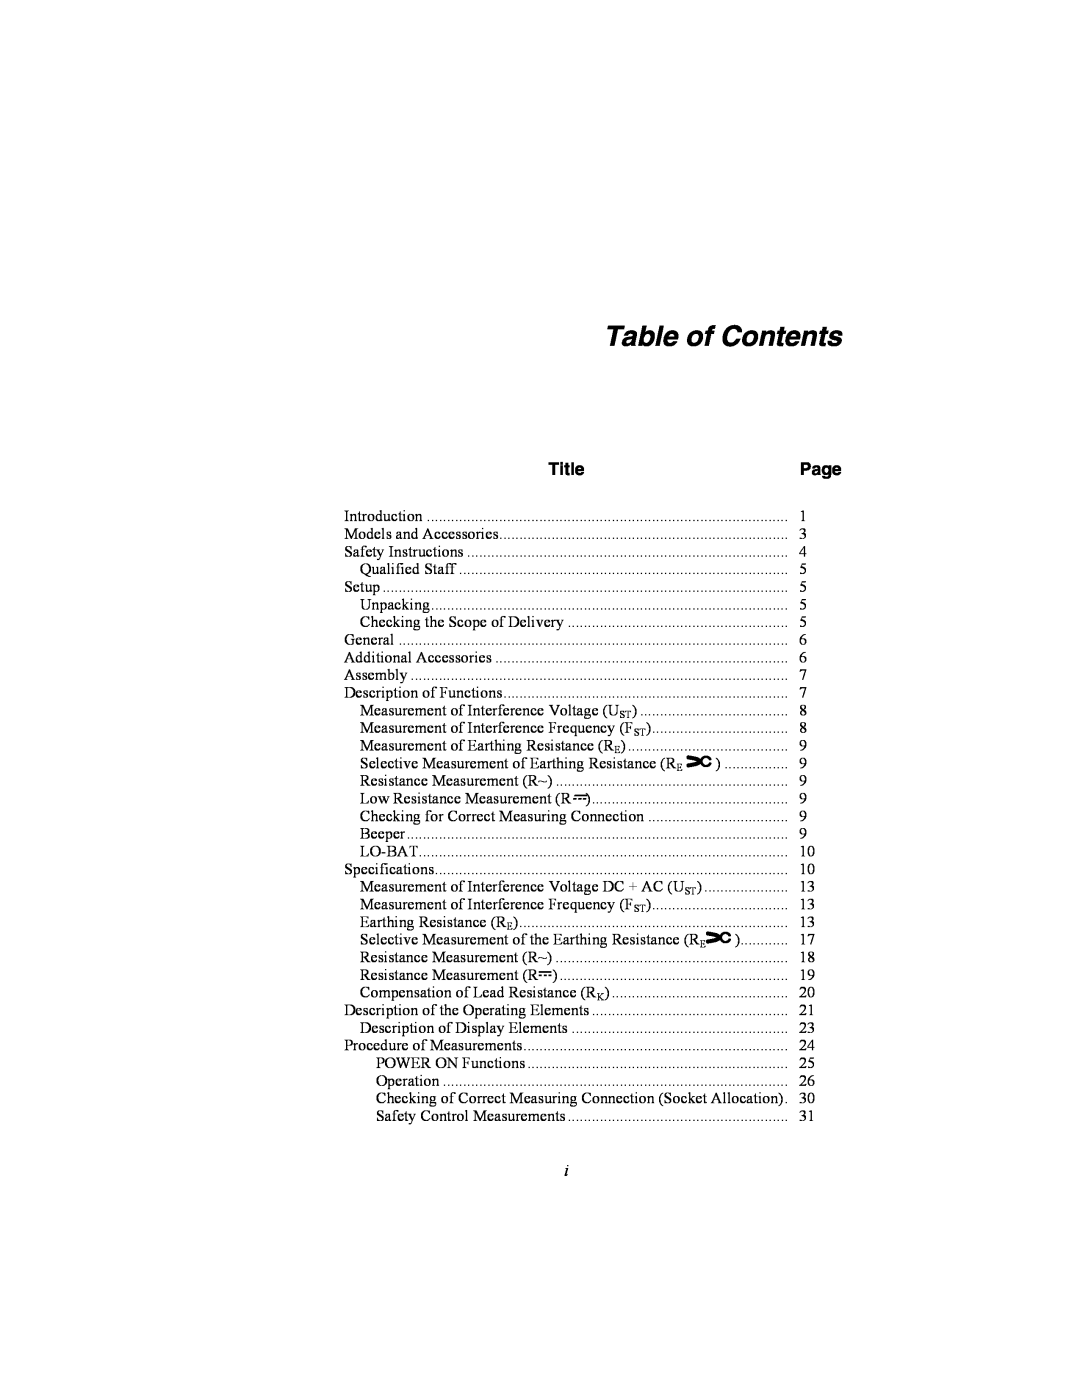 Fluke 1625 user manual Table of Contents, Title 